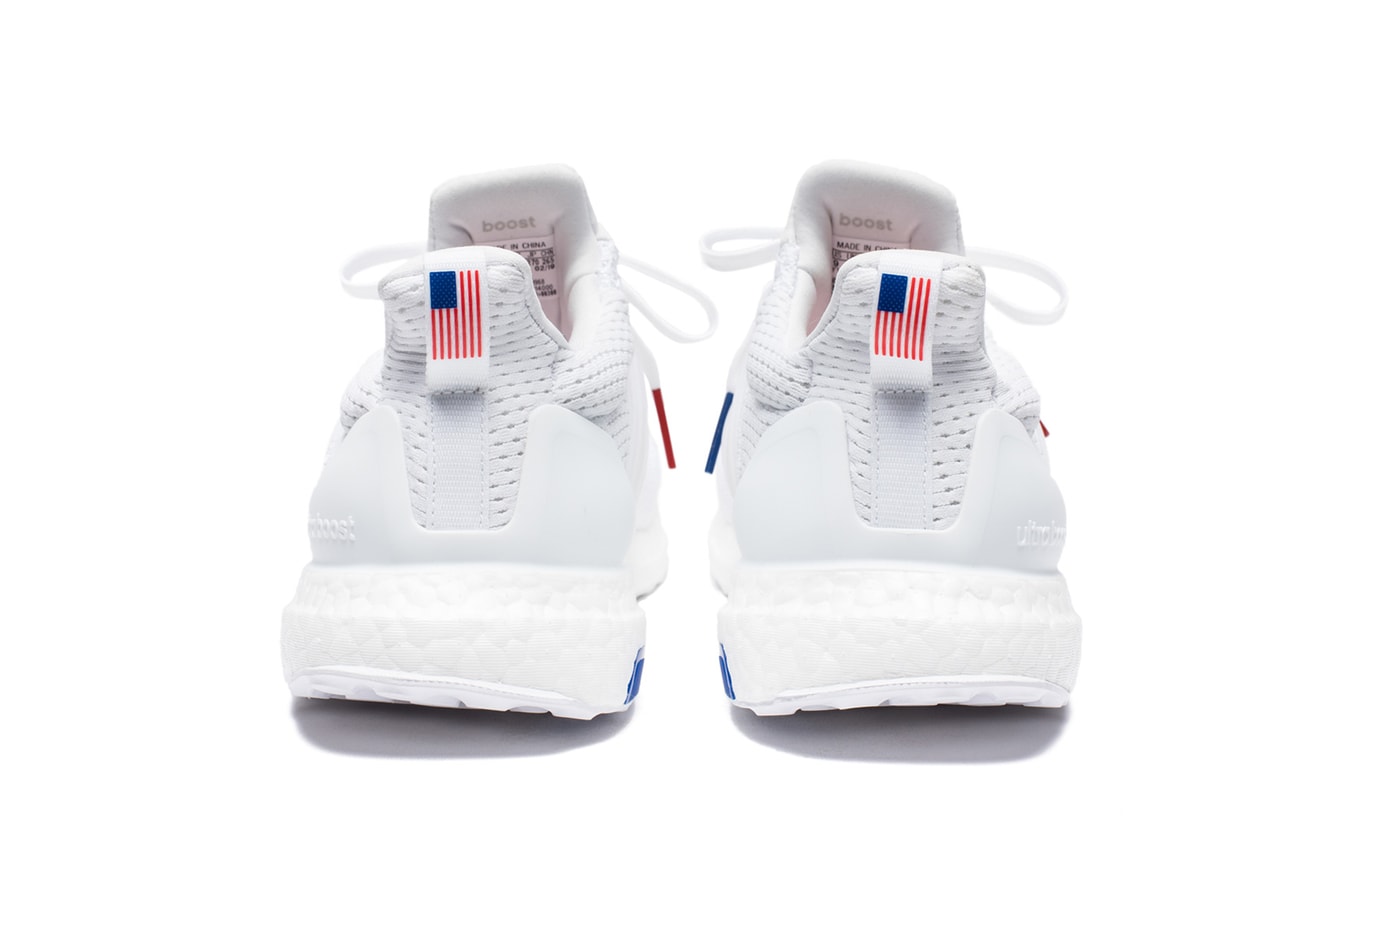 UNDEFEATED x adidas UltraBOOST 1.0 Release white red five strikes blue three strips james bond japan udftd release info america united states of america memorial day weekend